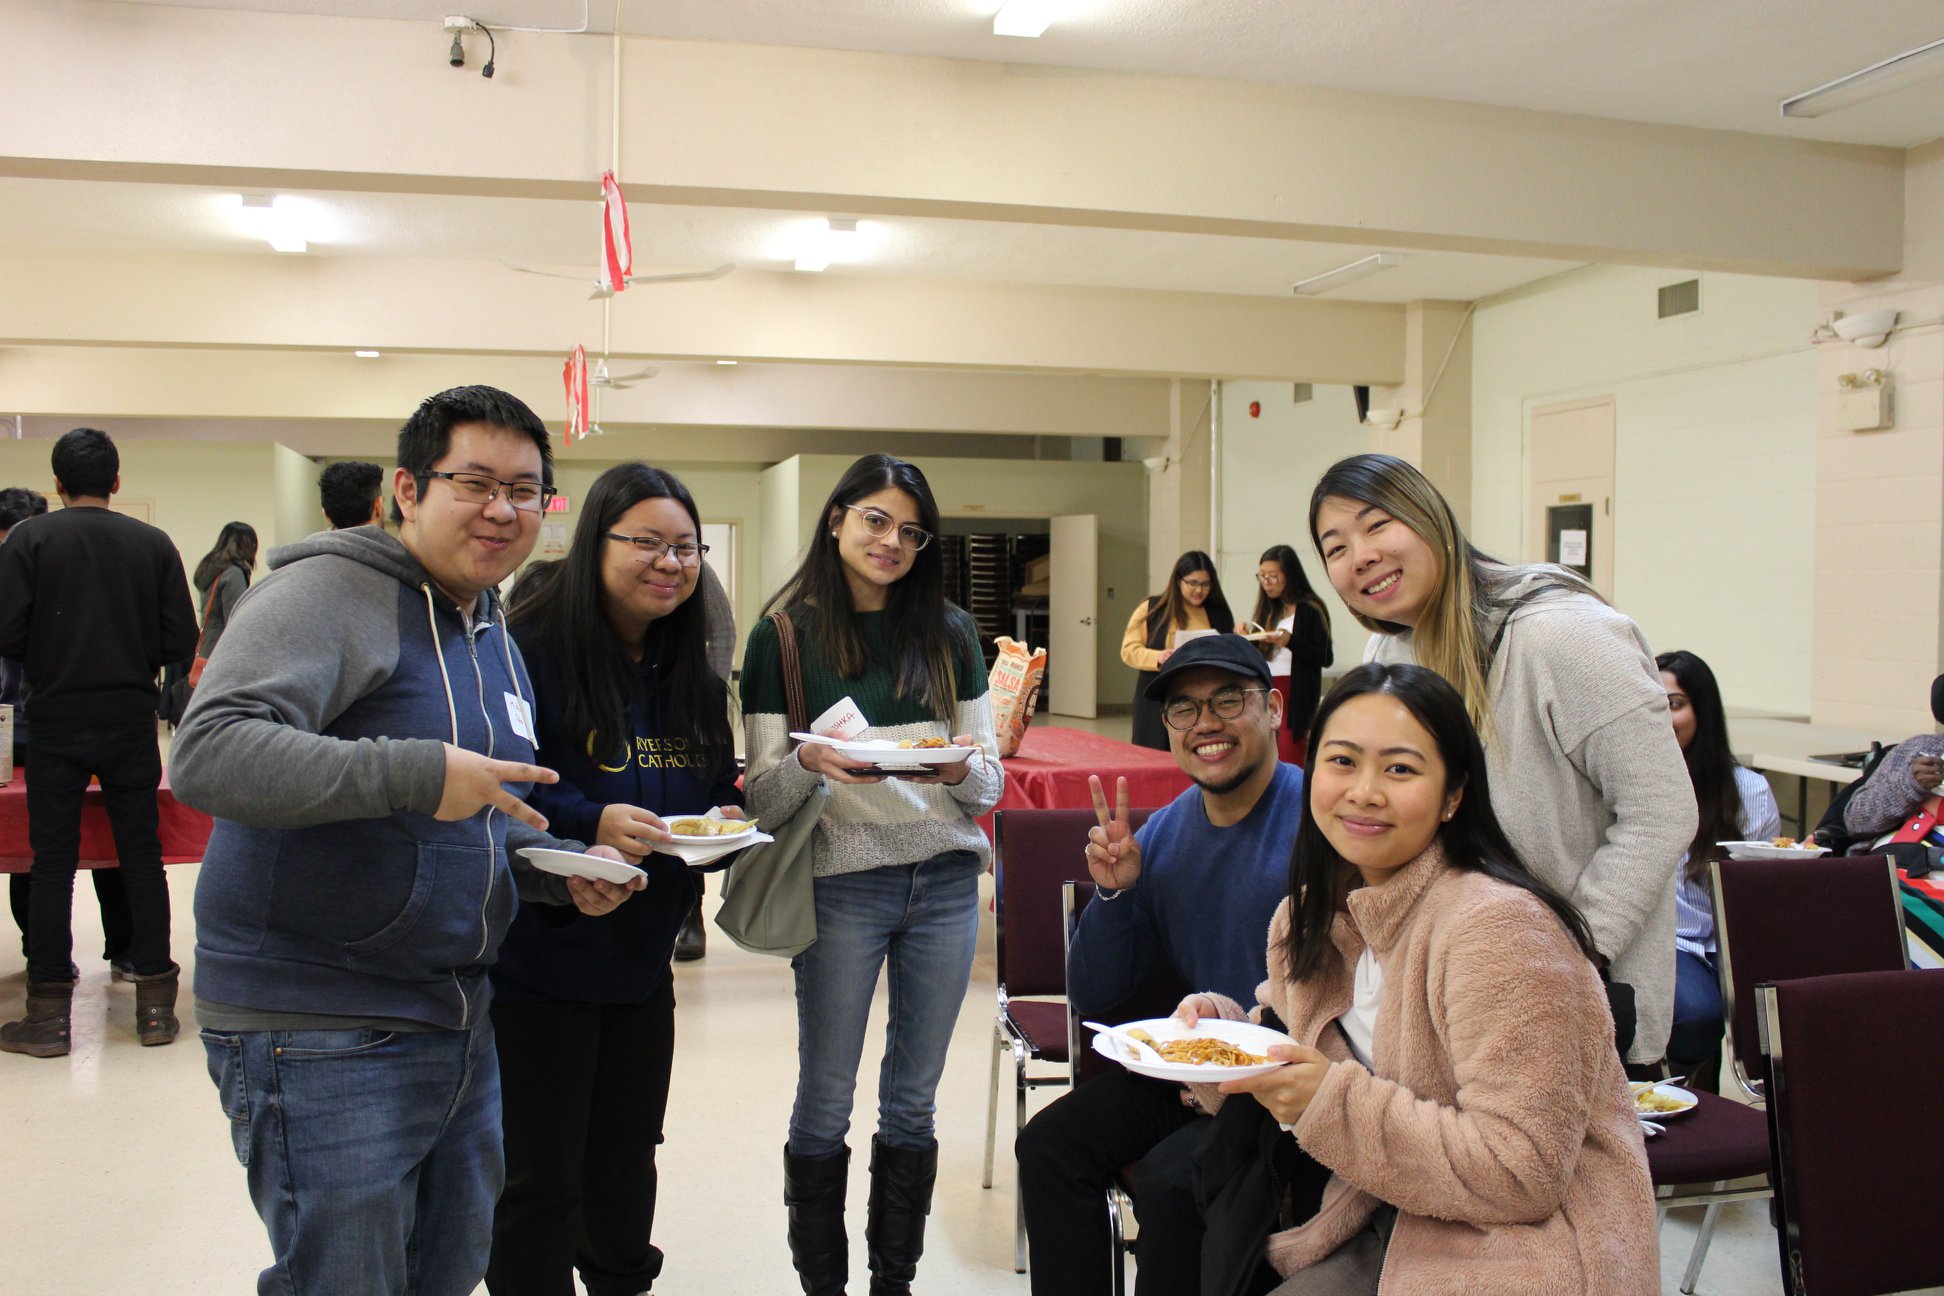 Group of multicultural young adults gathered over conversation and food